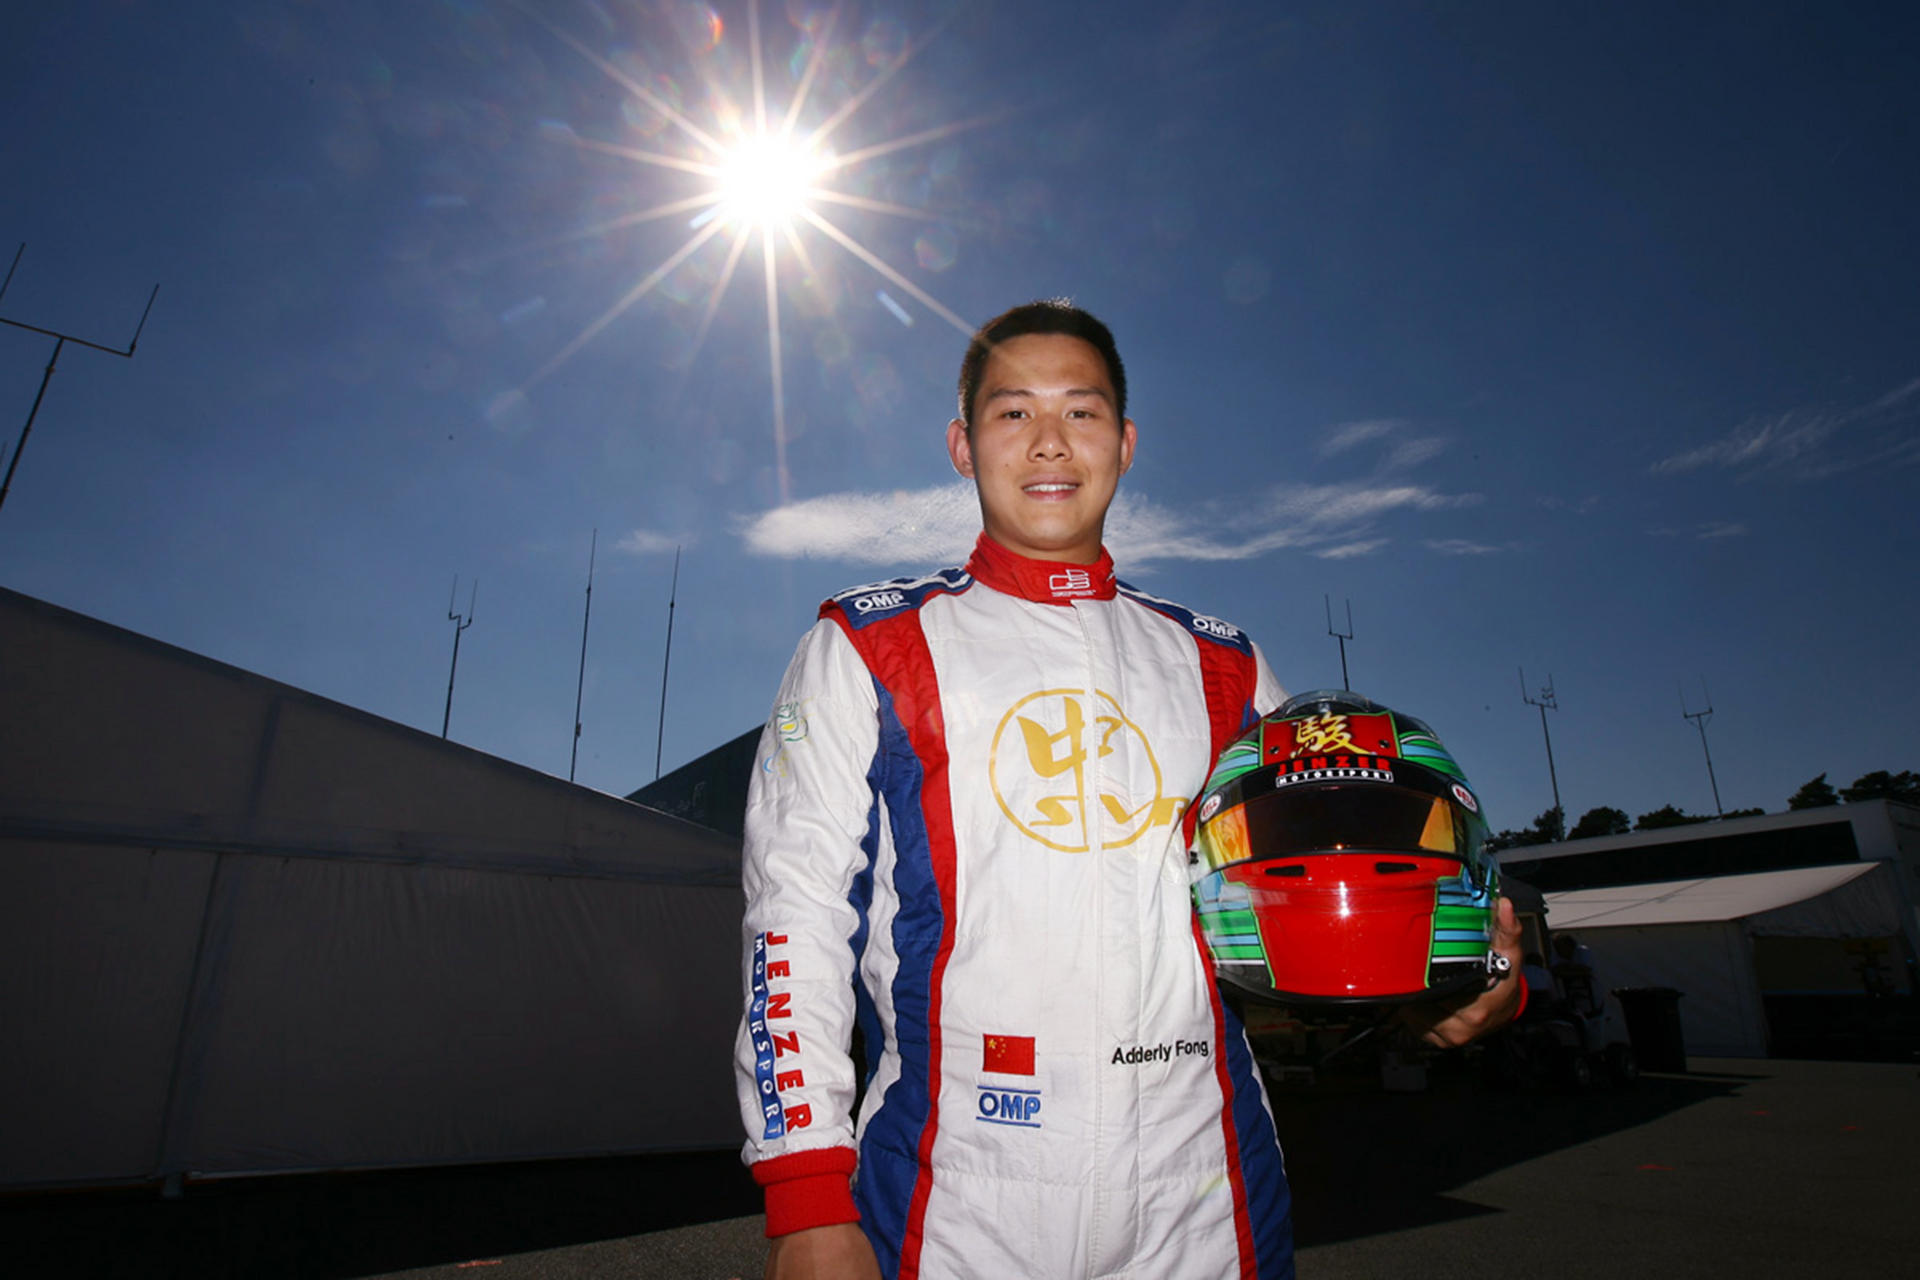 Hong Kong racer Adderly Fong made history as the first driver from the city to take the wheel in an F1 testing session. Photos: SCMP Pictures